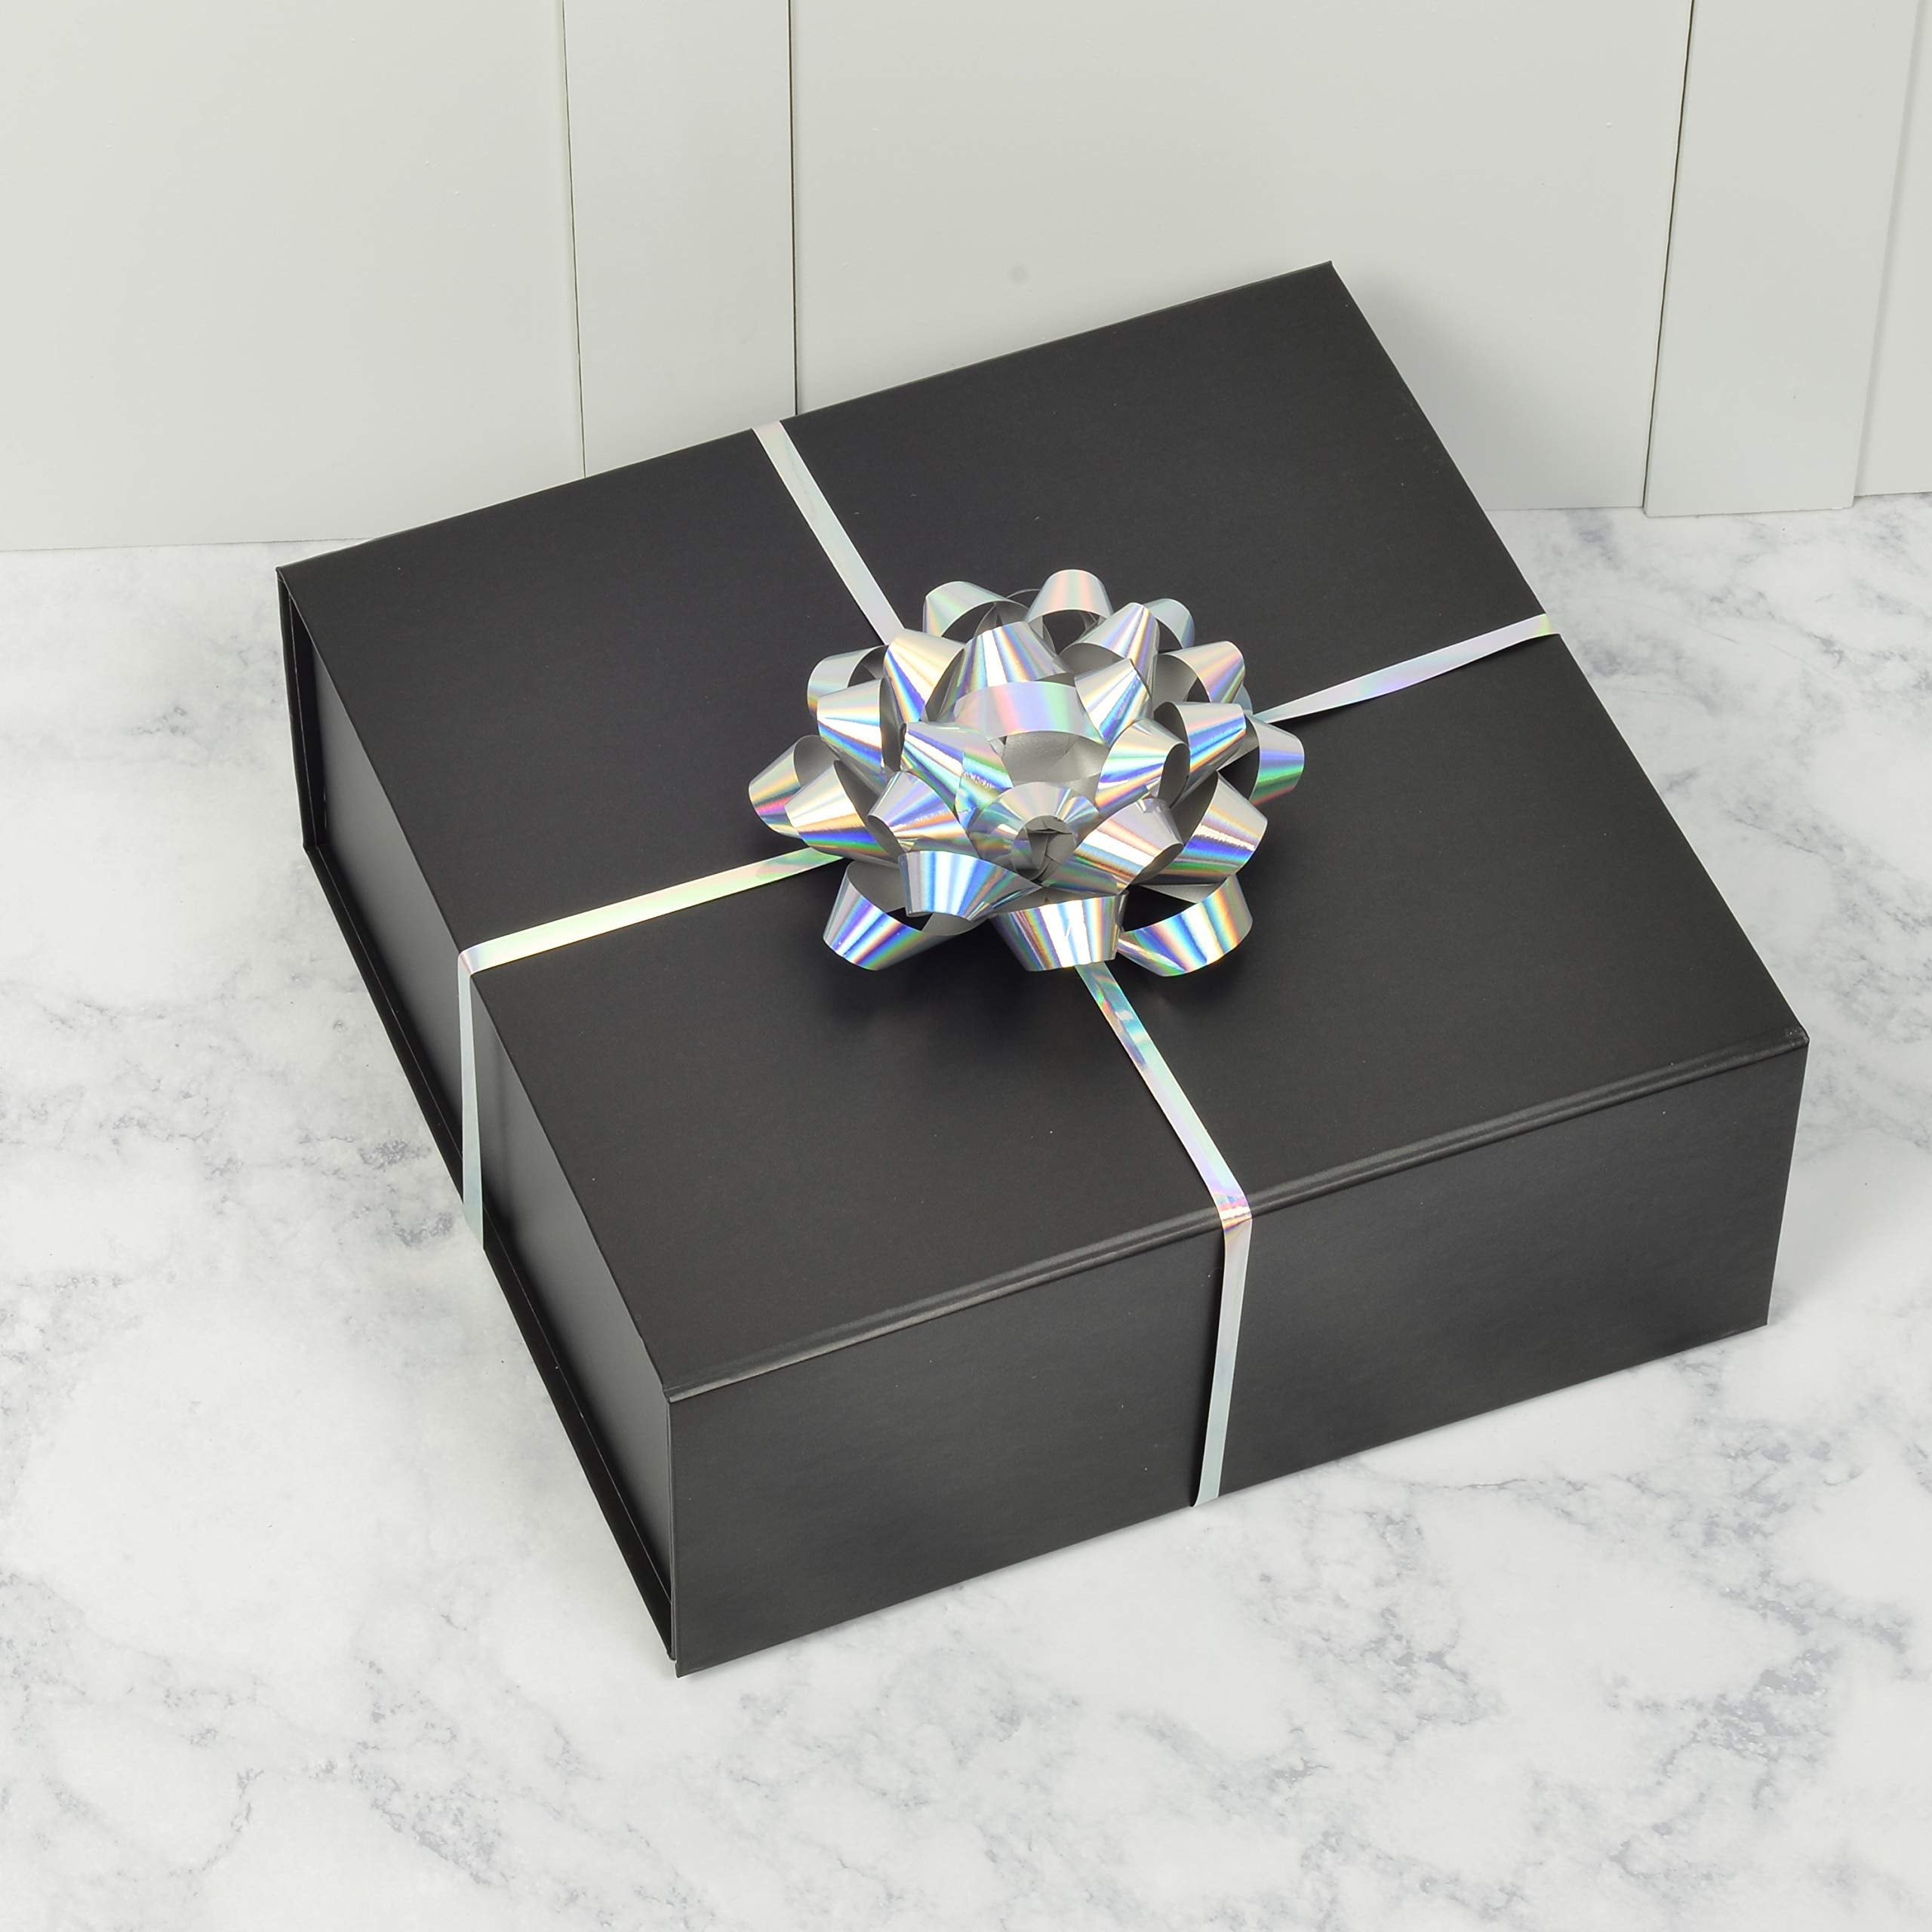 OccasionALL 9.4x9.4x3.7 1 Piece Black Box with Lid, Magnetic Gift Box Large with Magnetic Closure for Small Business, Wedding, Bridesmaids, Holidays  - Like New